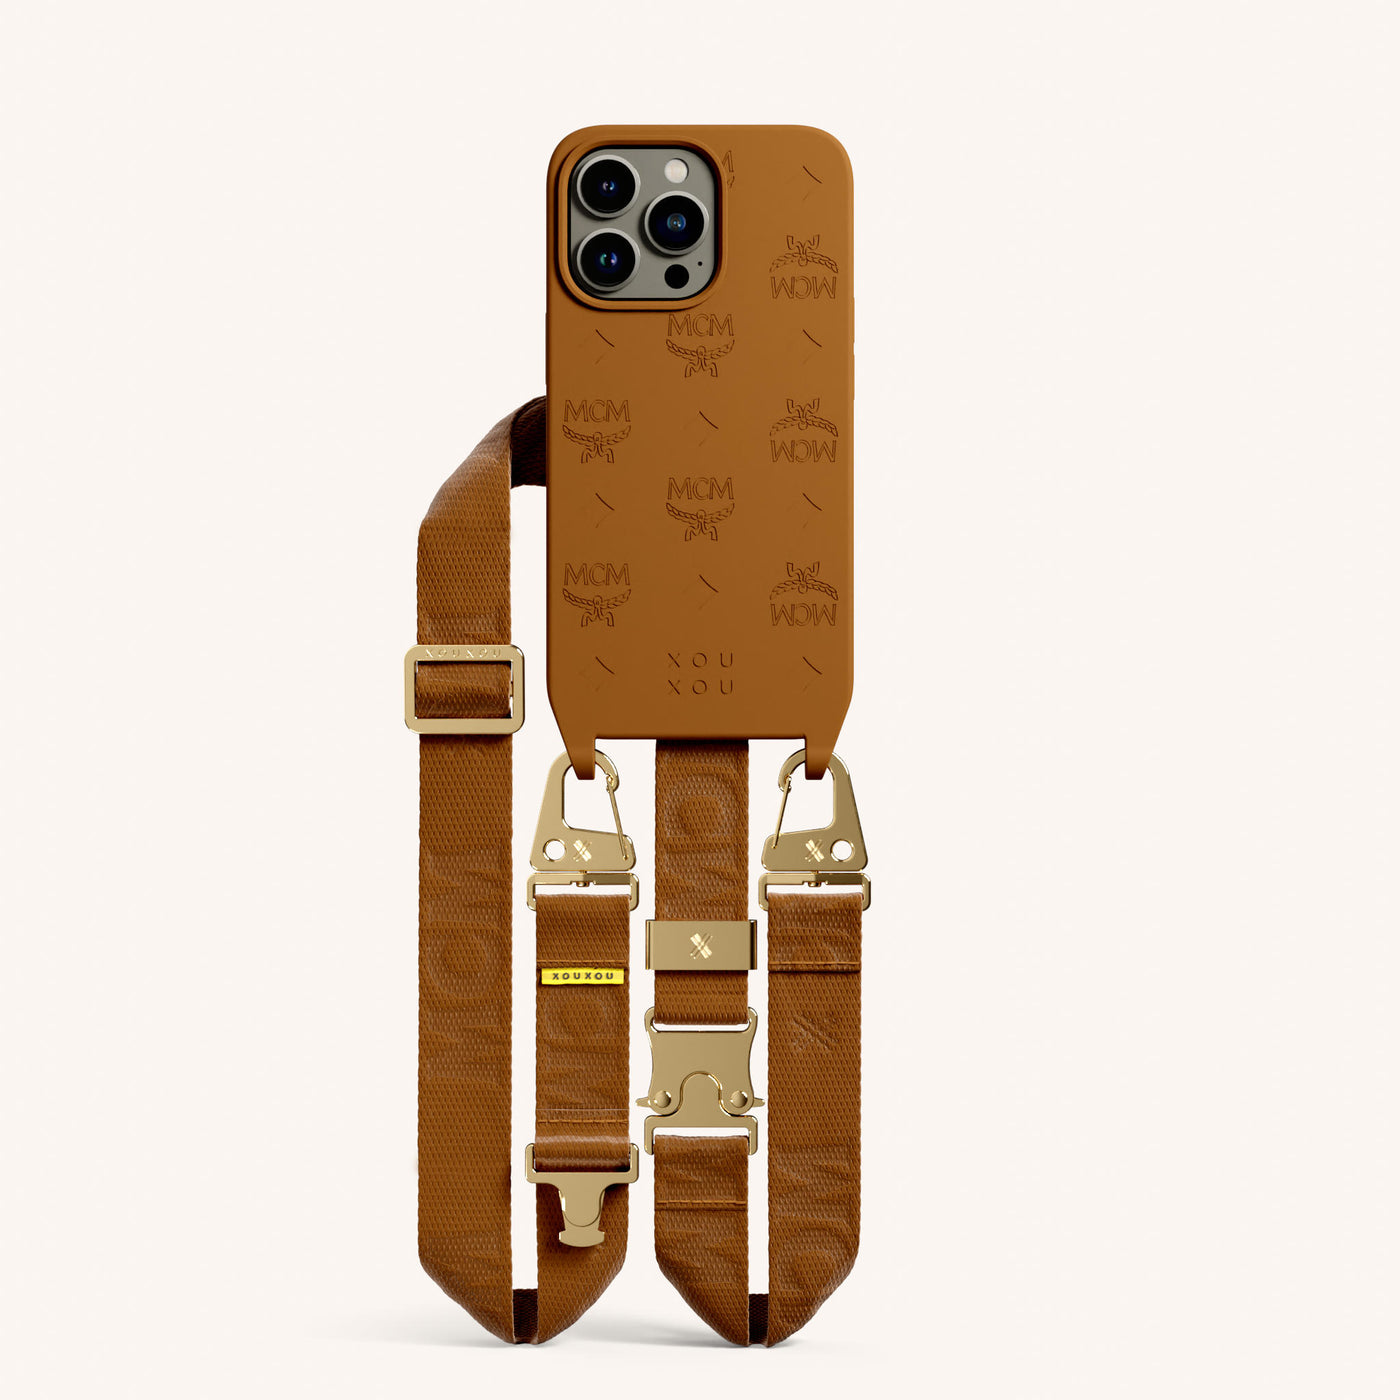 MCM x XOUXOU Phone Necklace for iPhone 13 Pro with MagSafe in Cognac Total View | XOUXOU #phone model_iphone 13 pro